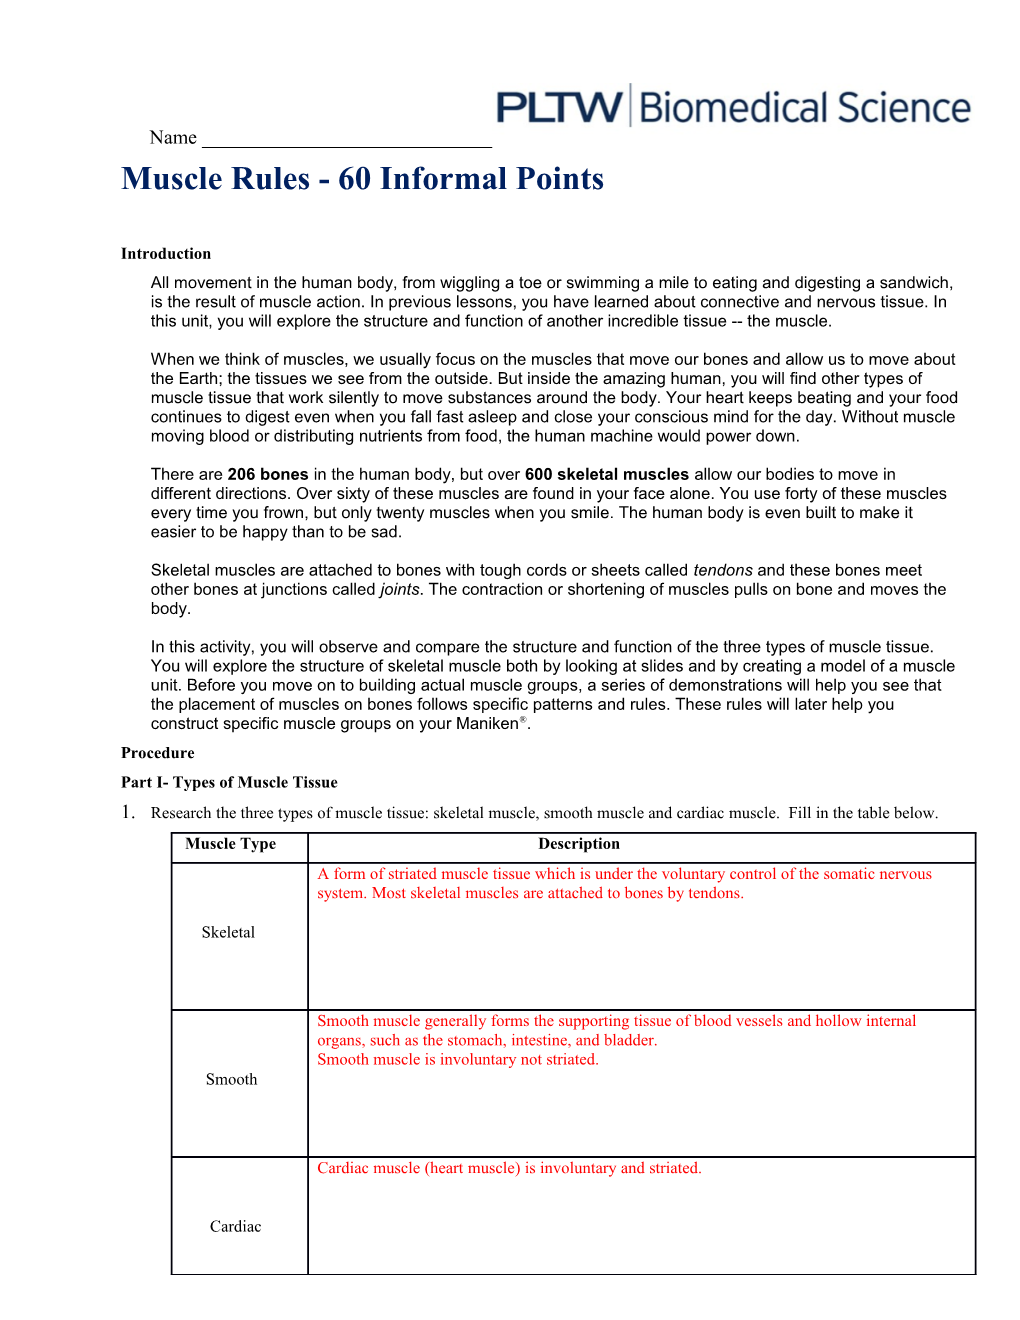 Muscle Rules - 60 Informal Points